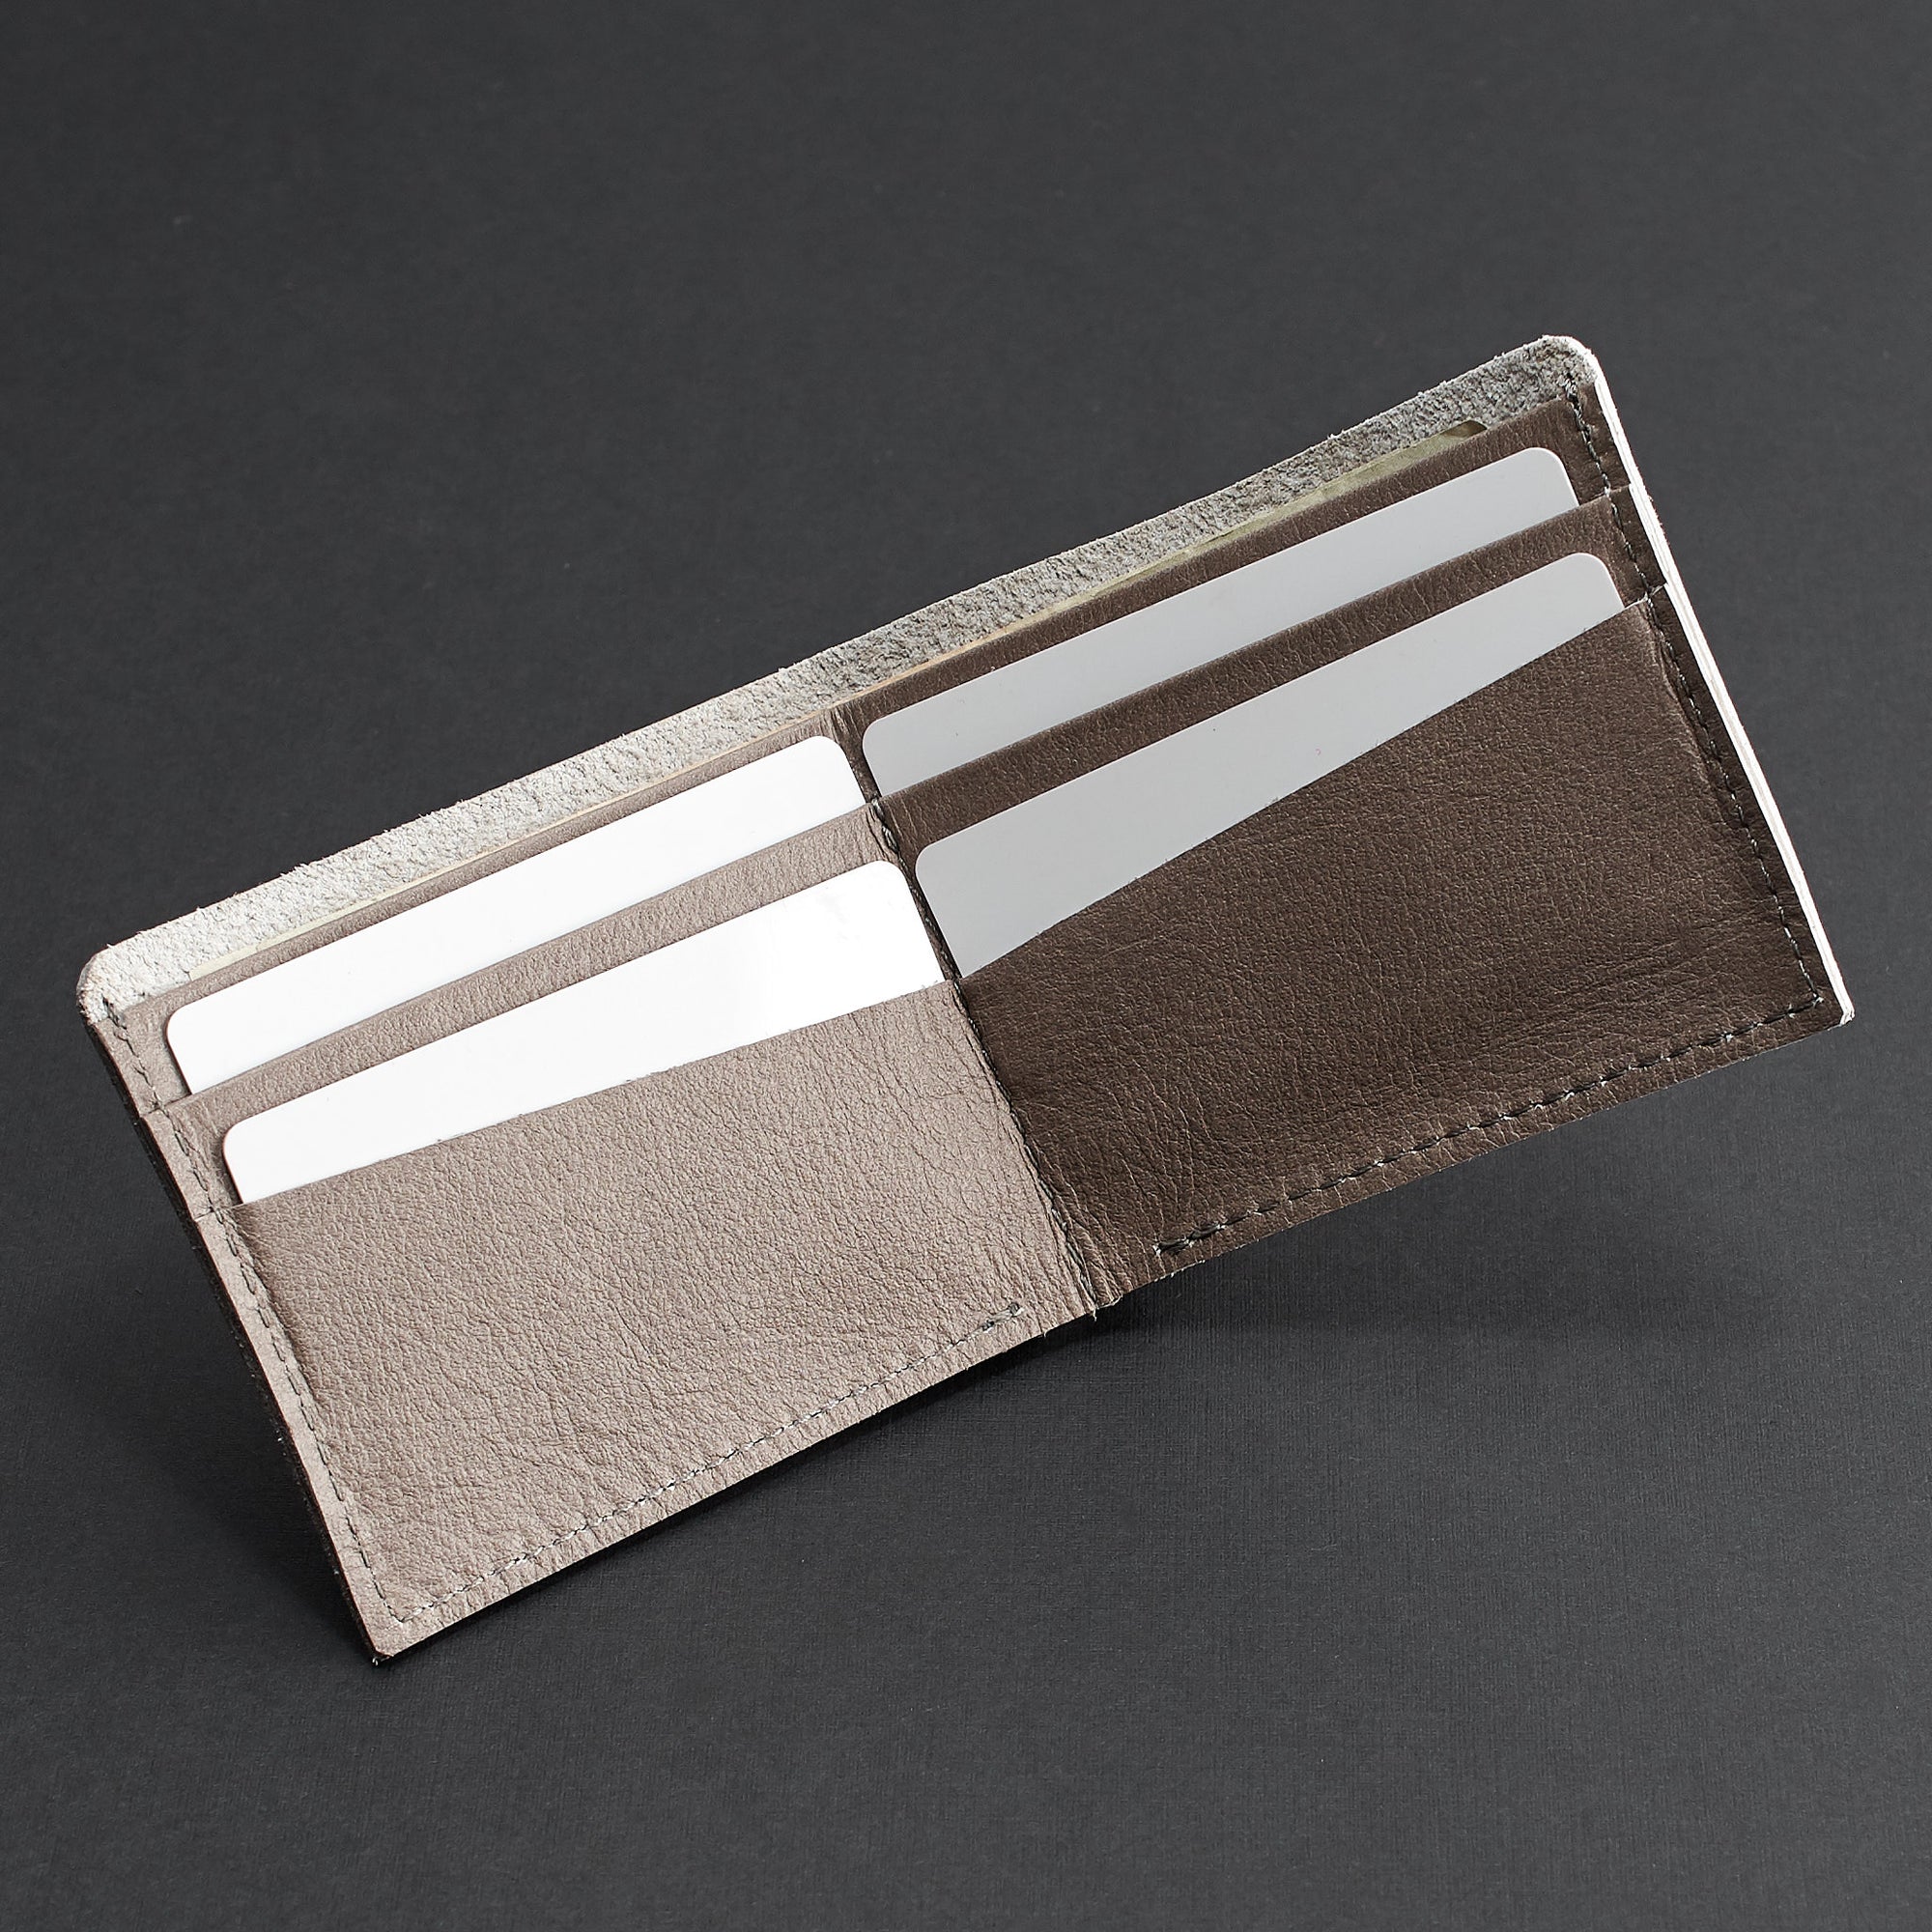 Style. Grey leather slim wallet, gifts for men, handmade accessories, minimalist full grain leather thin wallet